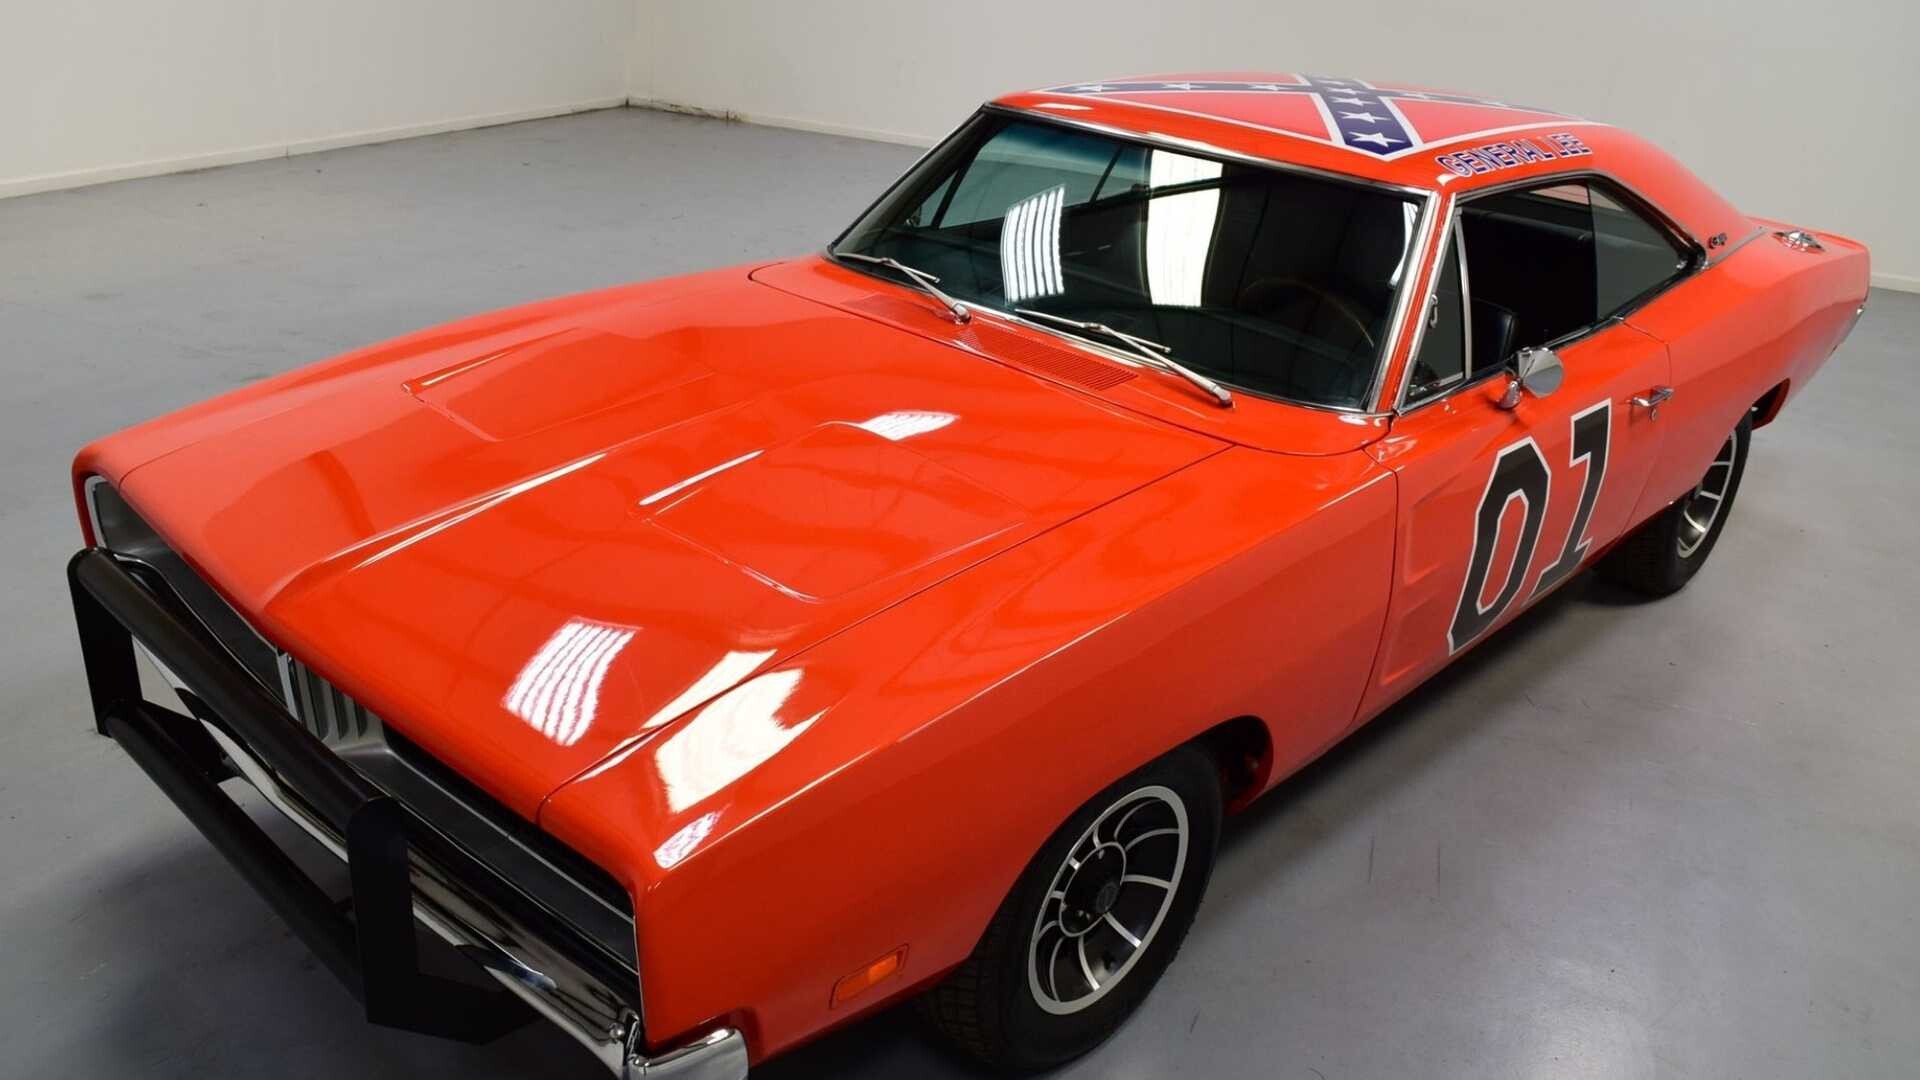 General Lee Car: One of the most covered incarnations of the Mopar icon, The classic Dodge Charger is the 1969 model. 1920x1080 Full HD Wallpaper.